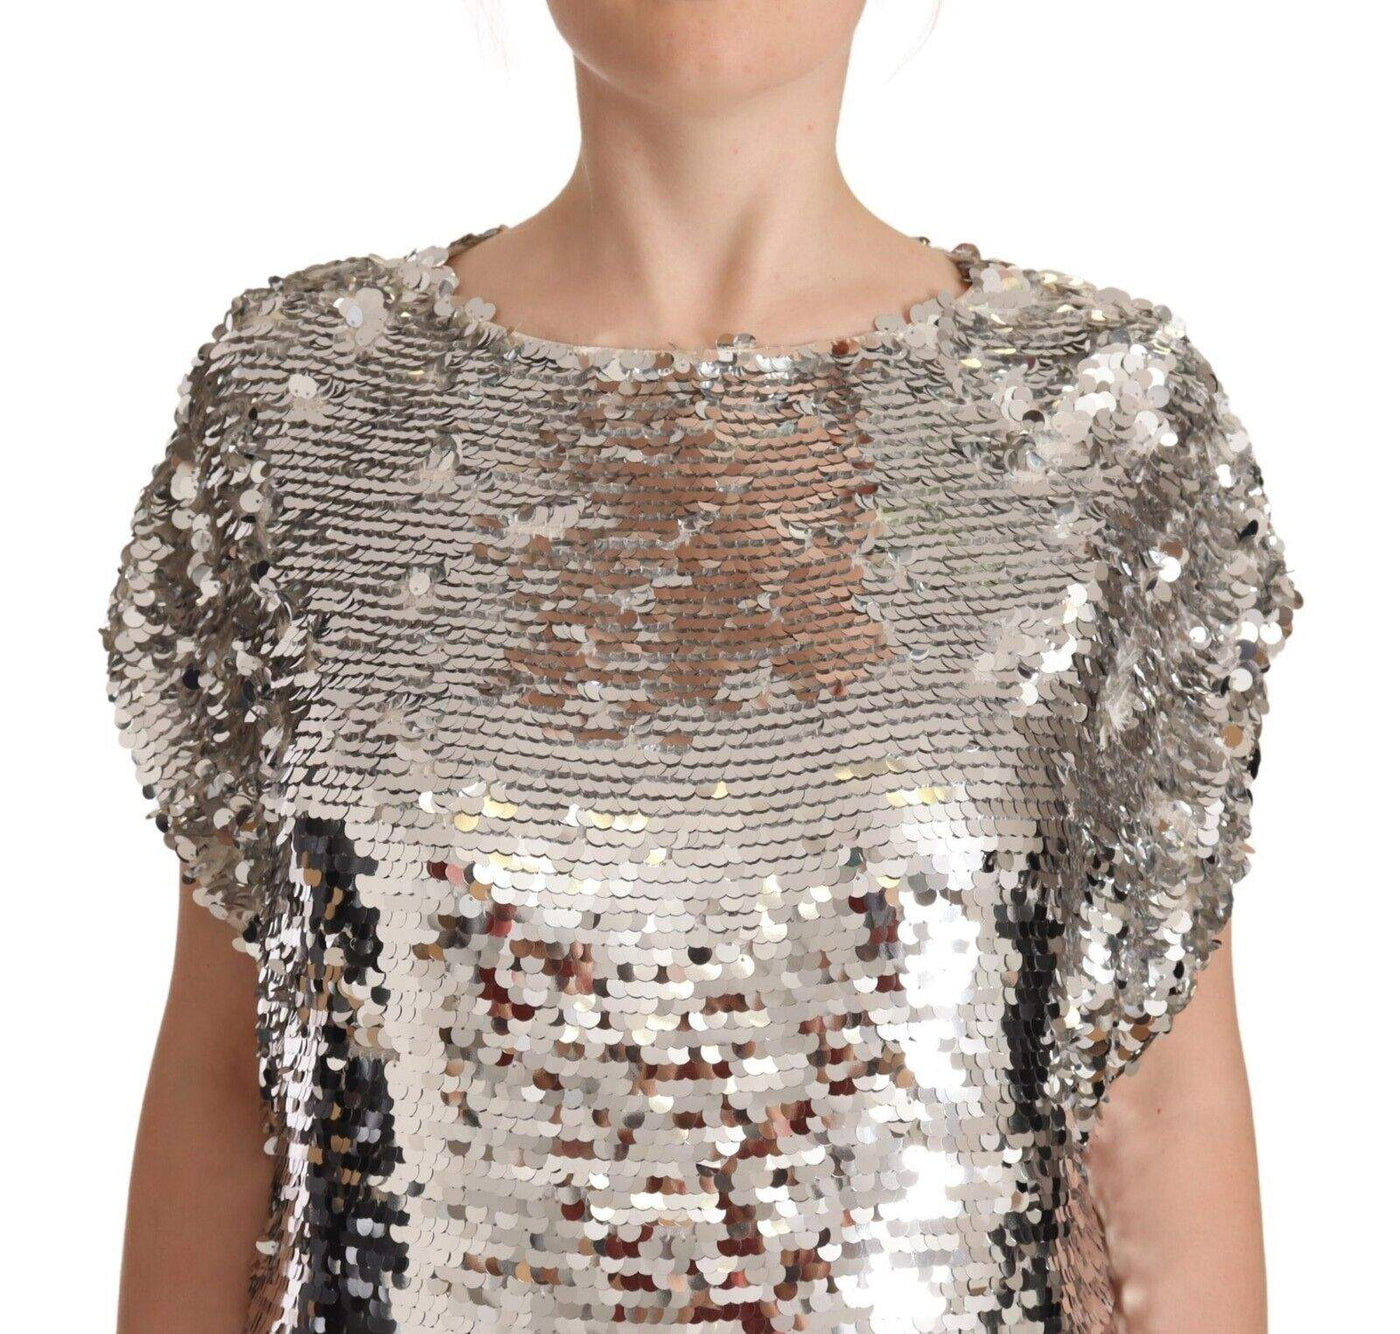 MSGM Silver Sequined Polyester Short Sleeves Shift Mini Dress Dresses - Women - Clothing, feed-1, IT38|XS, MSGM, Silver at SEYMAYKA